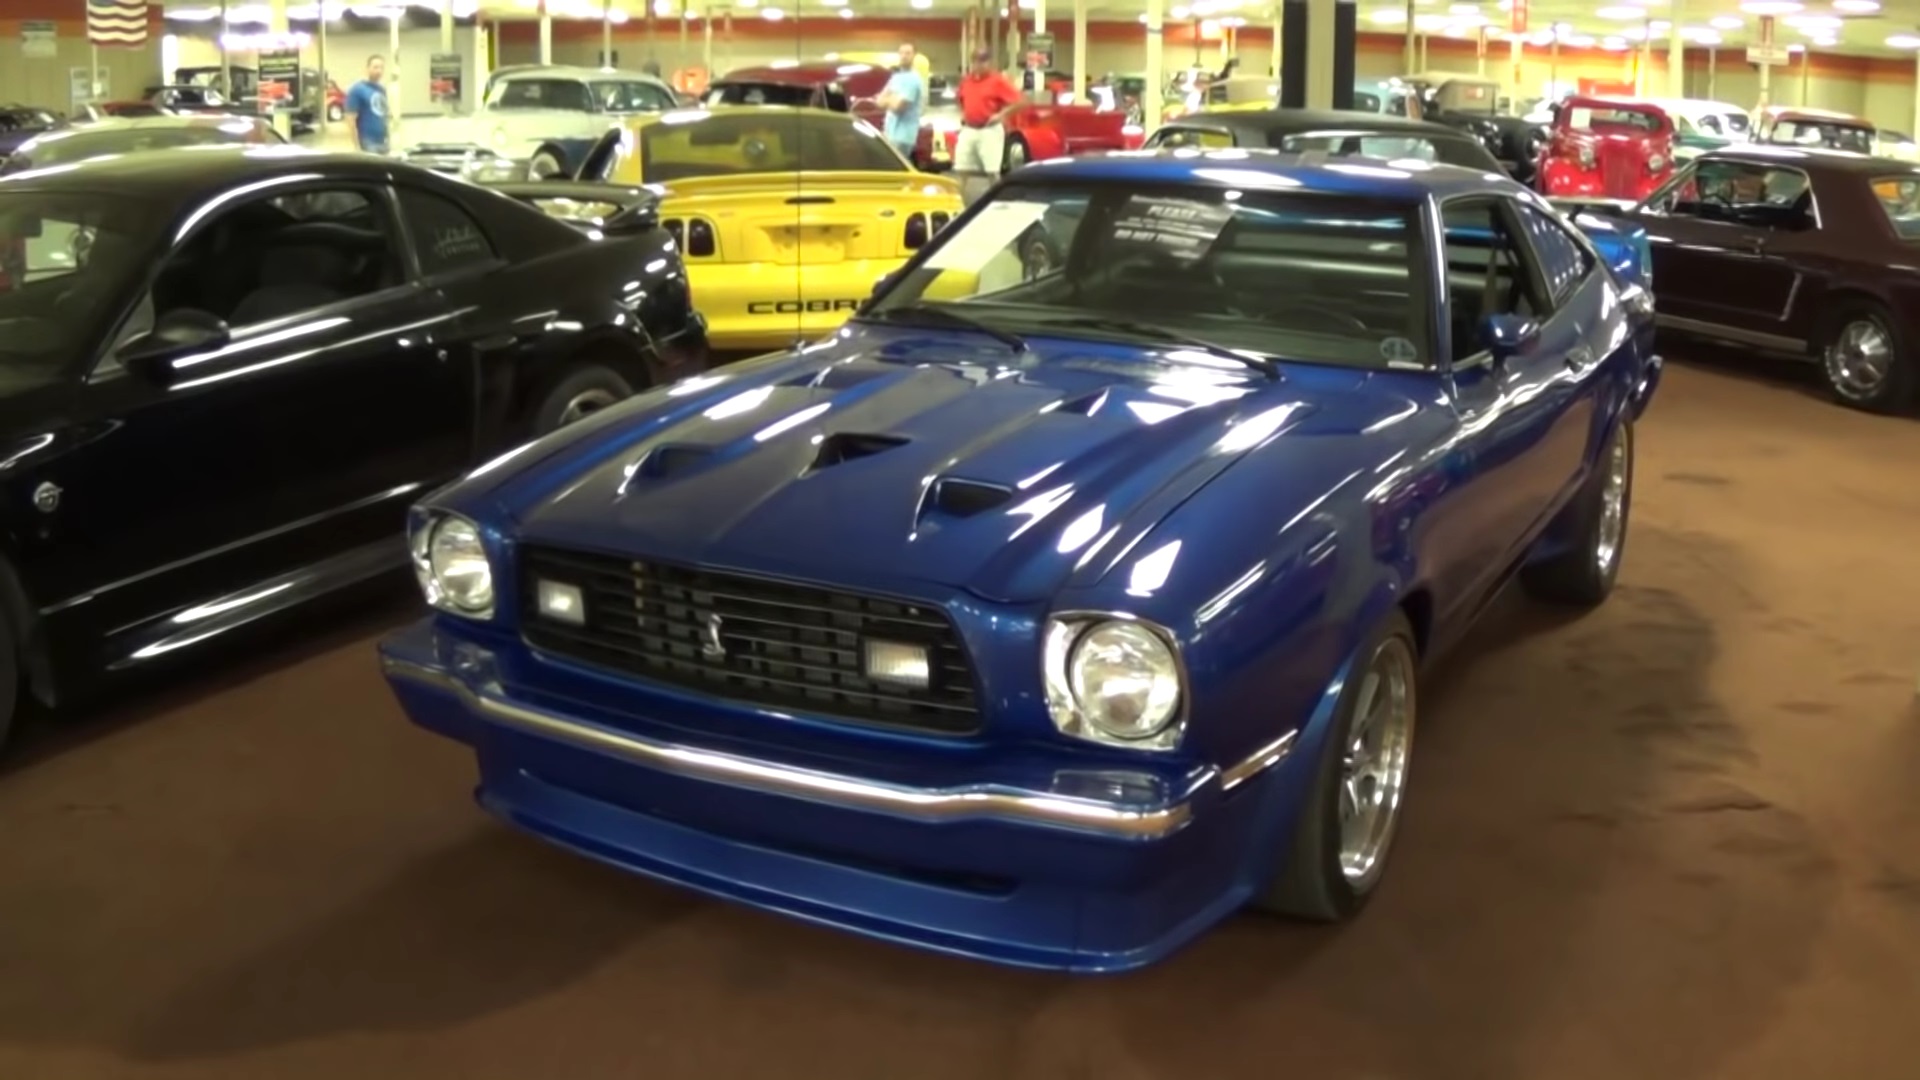 Video: Coolest 1978 Ford Mustang King Cobra You'll Ever See